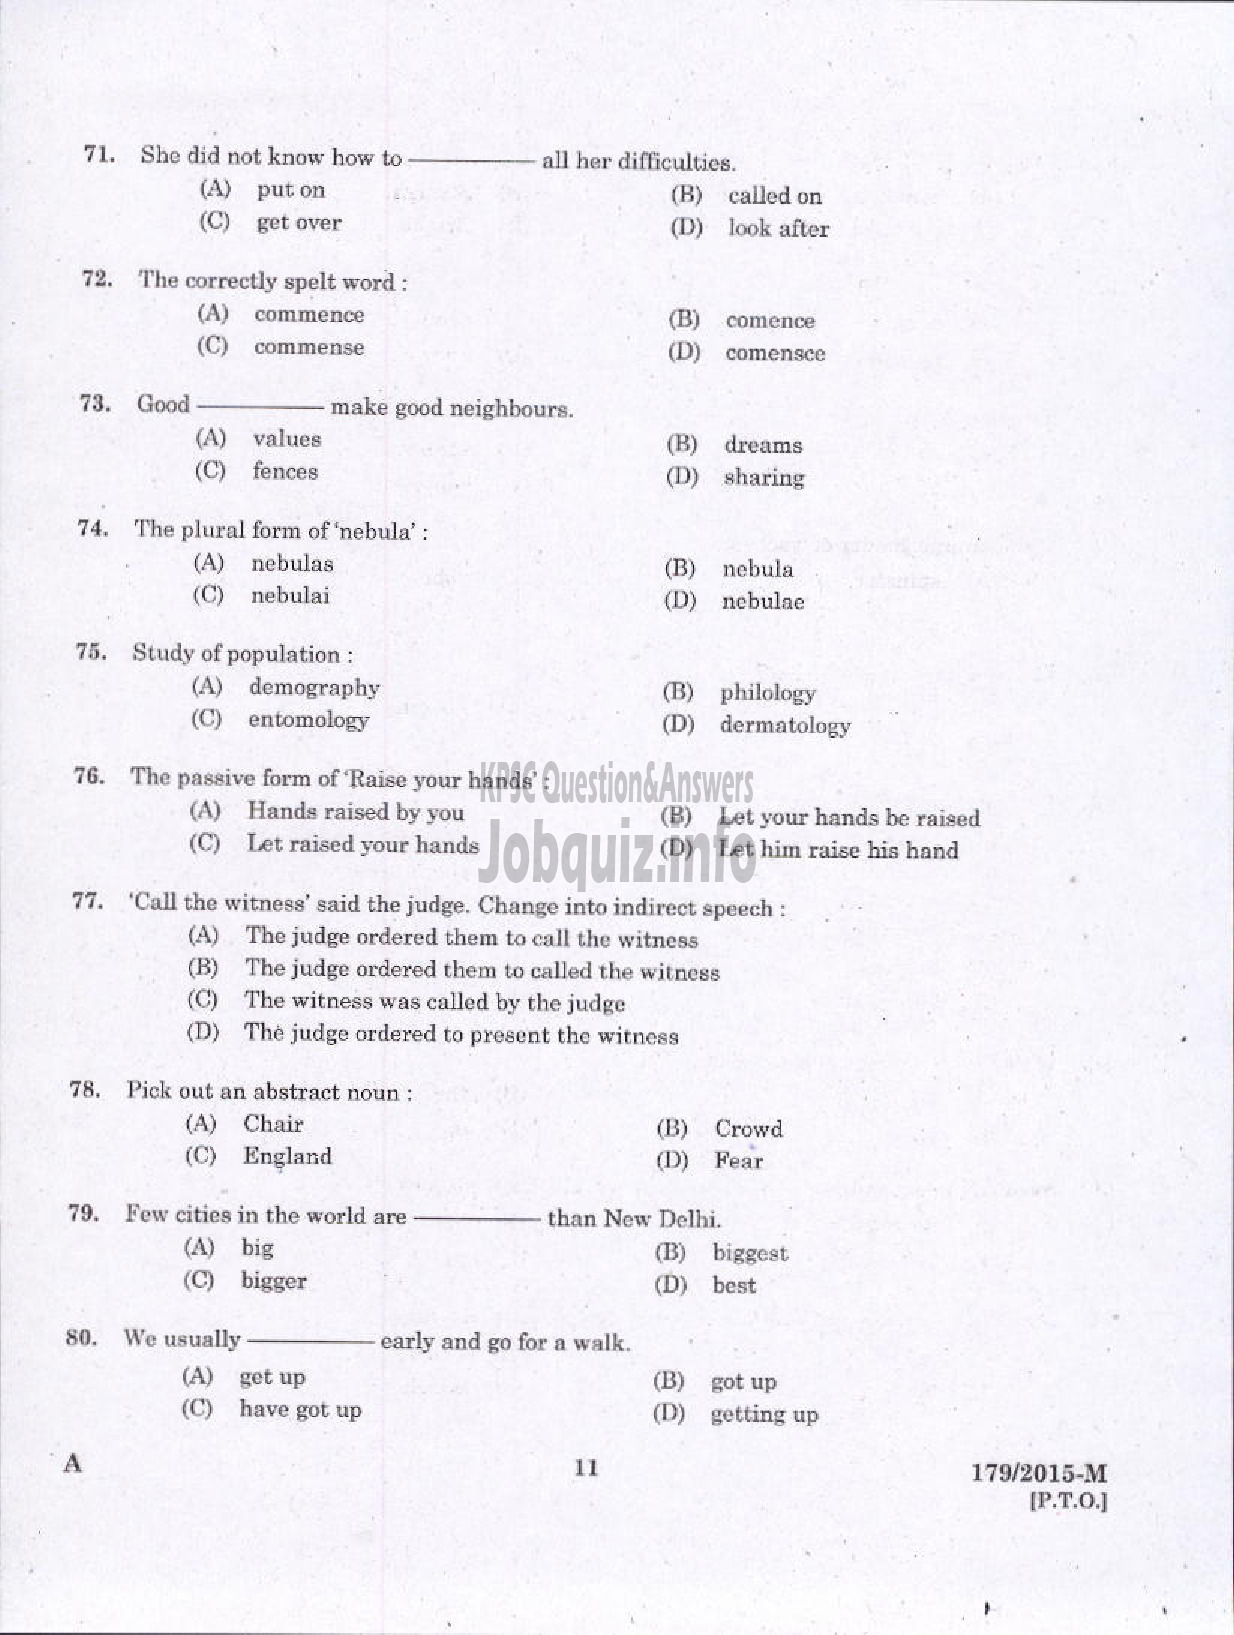 Kerala PSC Question Paper - POLICE CONSTABLE ARMED POLICE BATTALION POLICE/WOMEN POLICE CONSTABLE ARMED POLICE BATTALION POLICE ( Malayalam ) -9